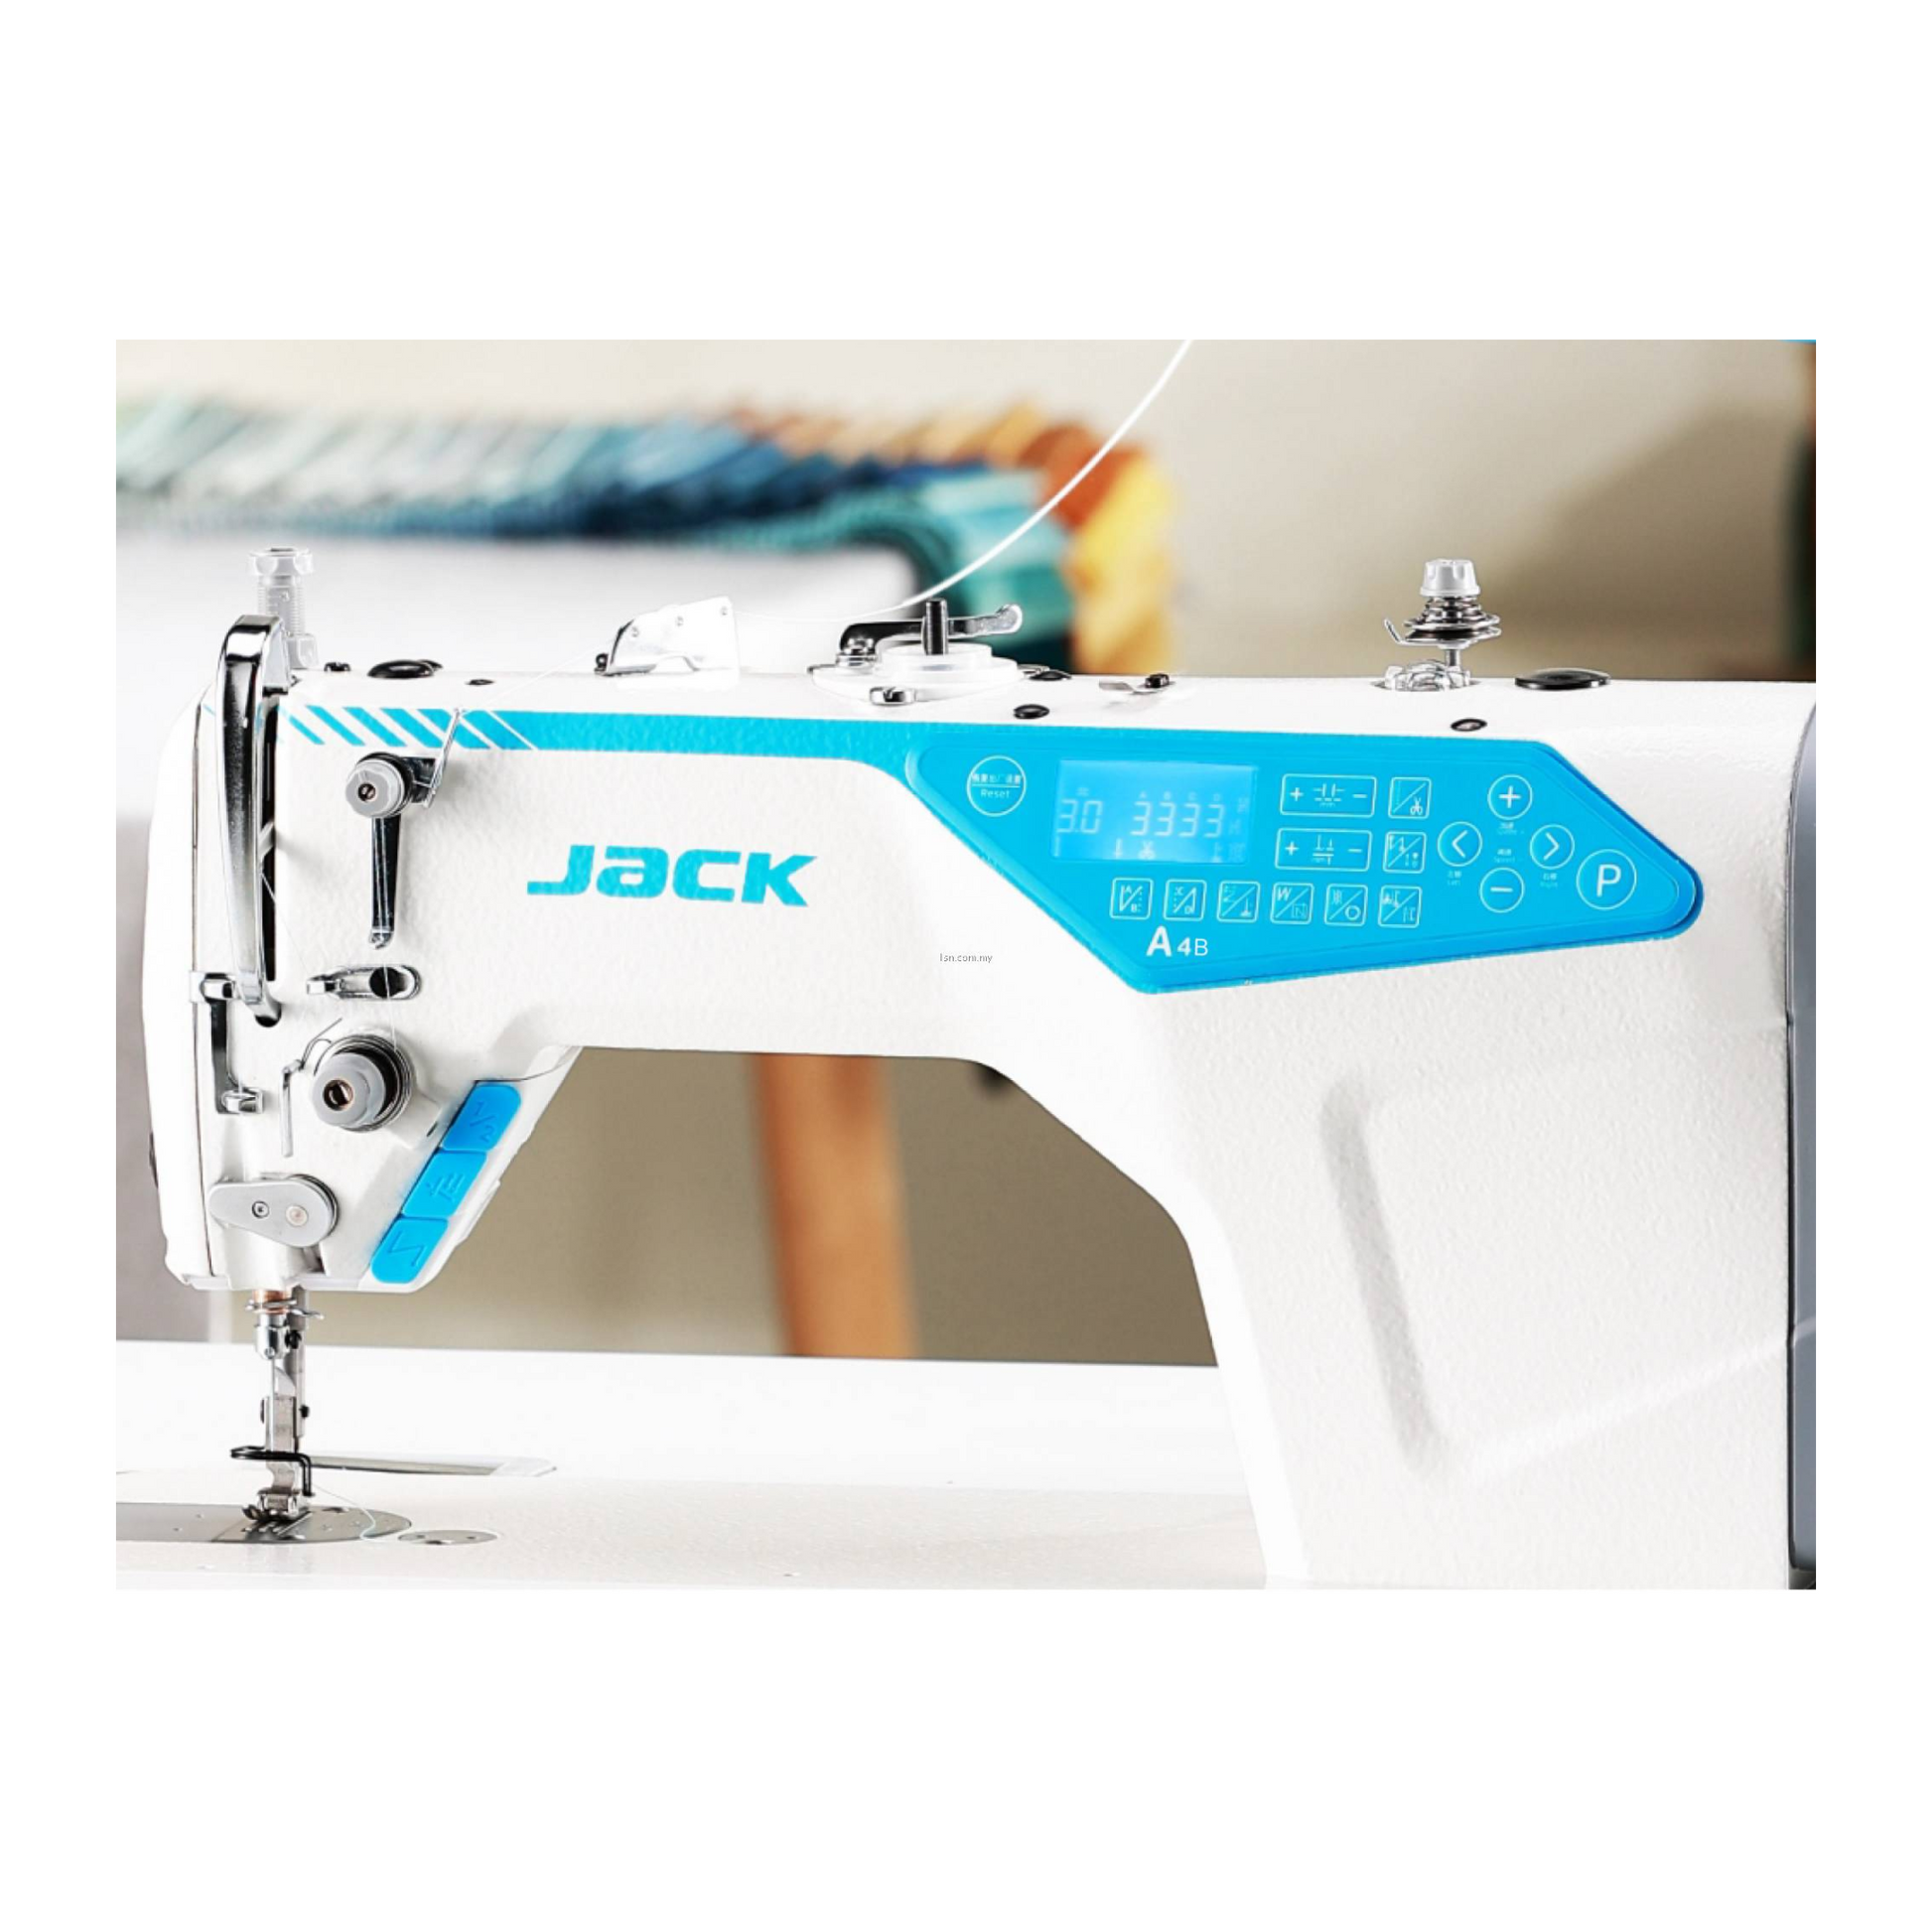 Jack A4B - C four functions stepping motor controlled computerized lockstitch machine - Sewing machine - White - Front view